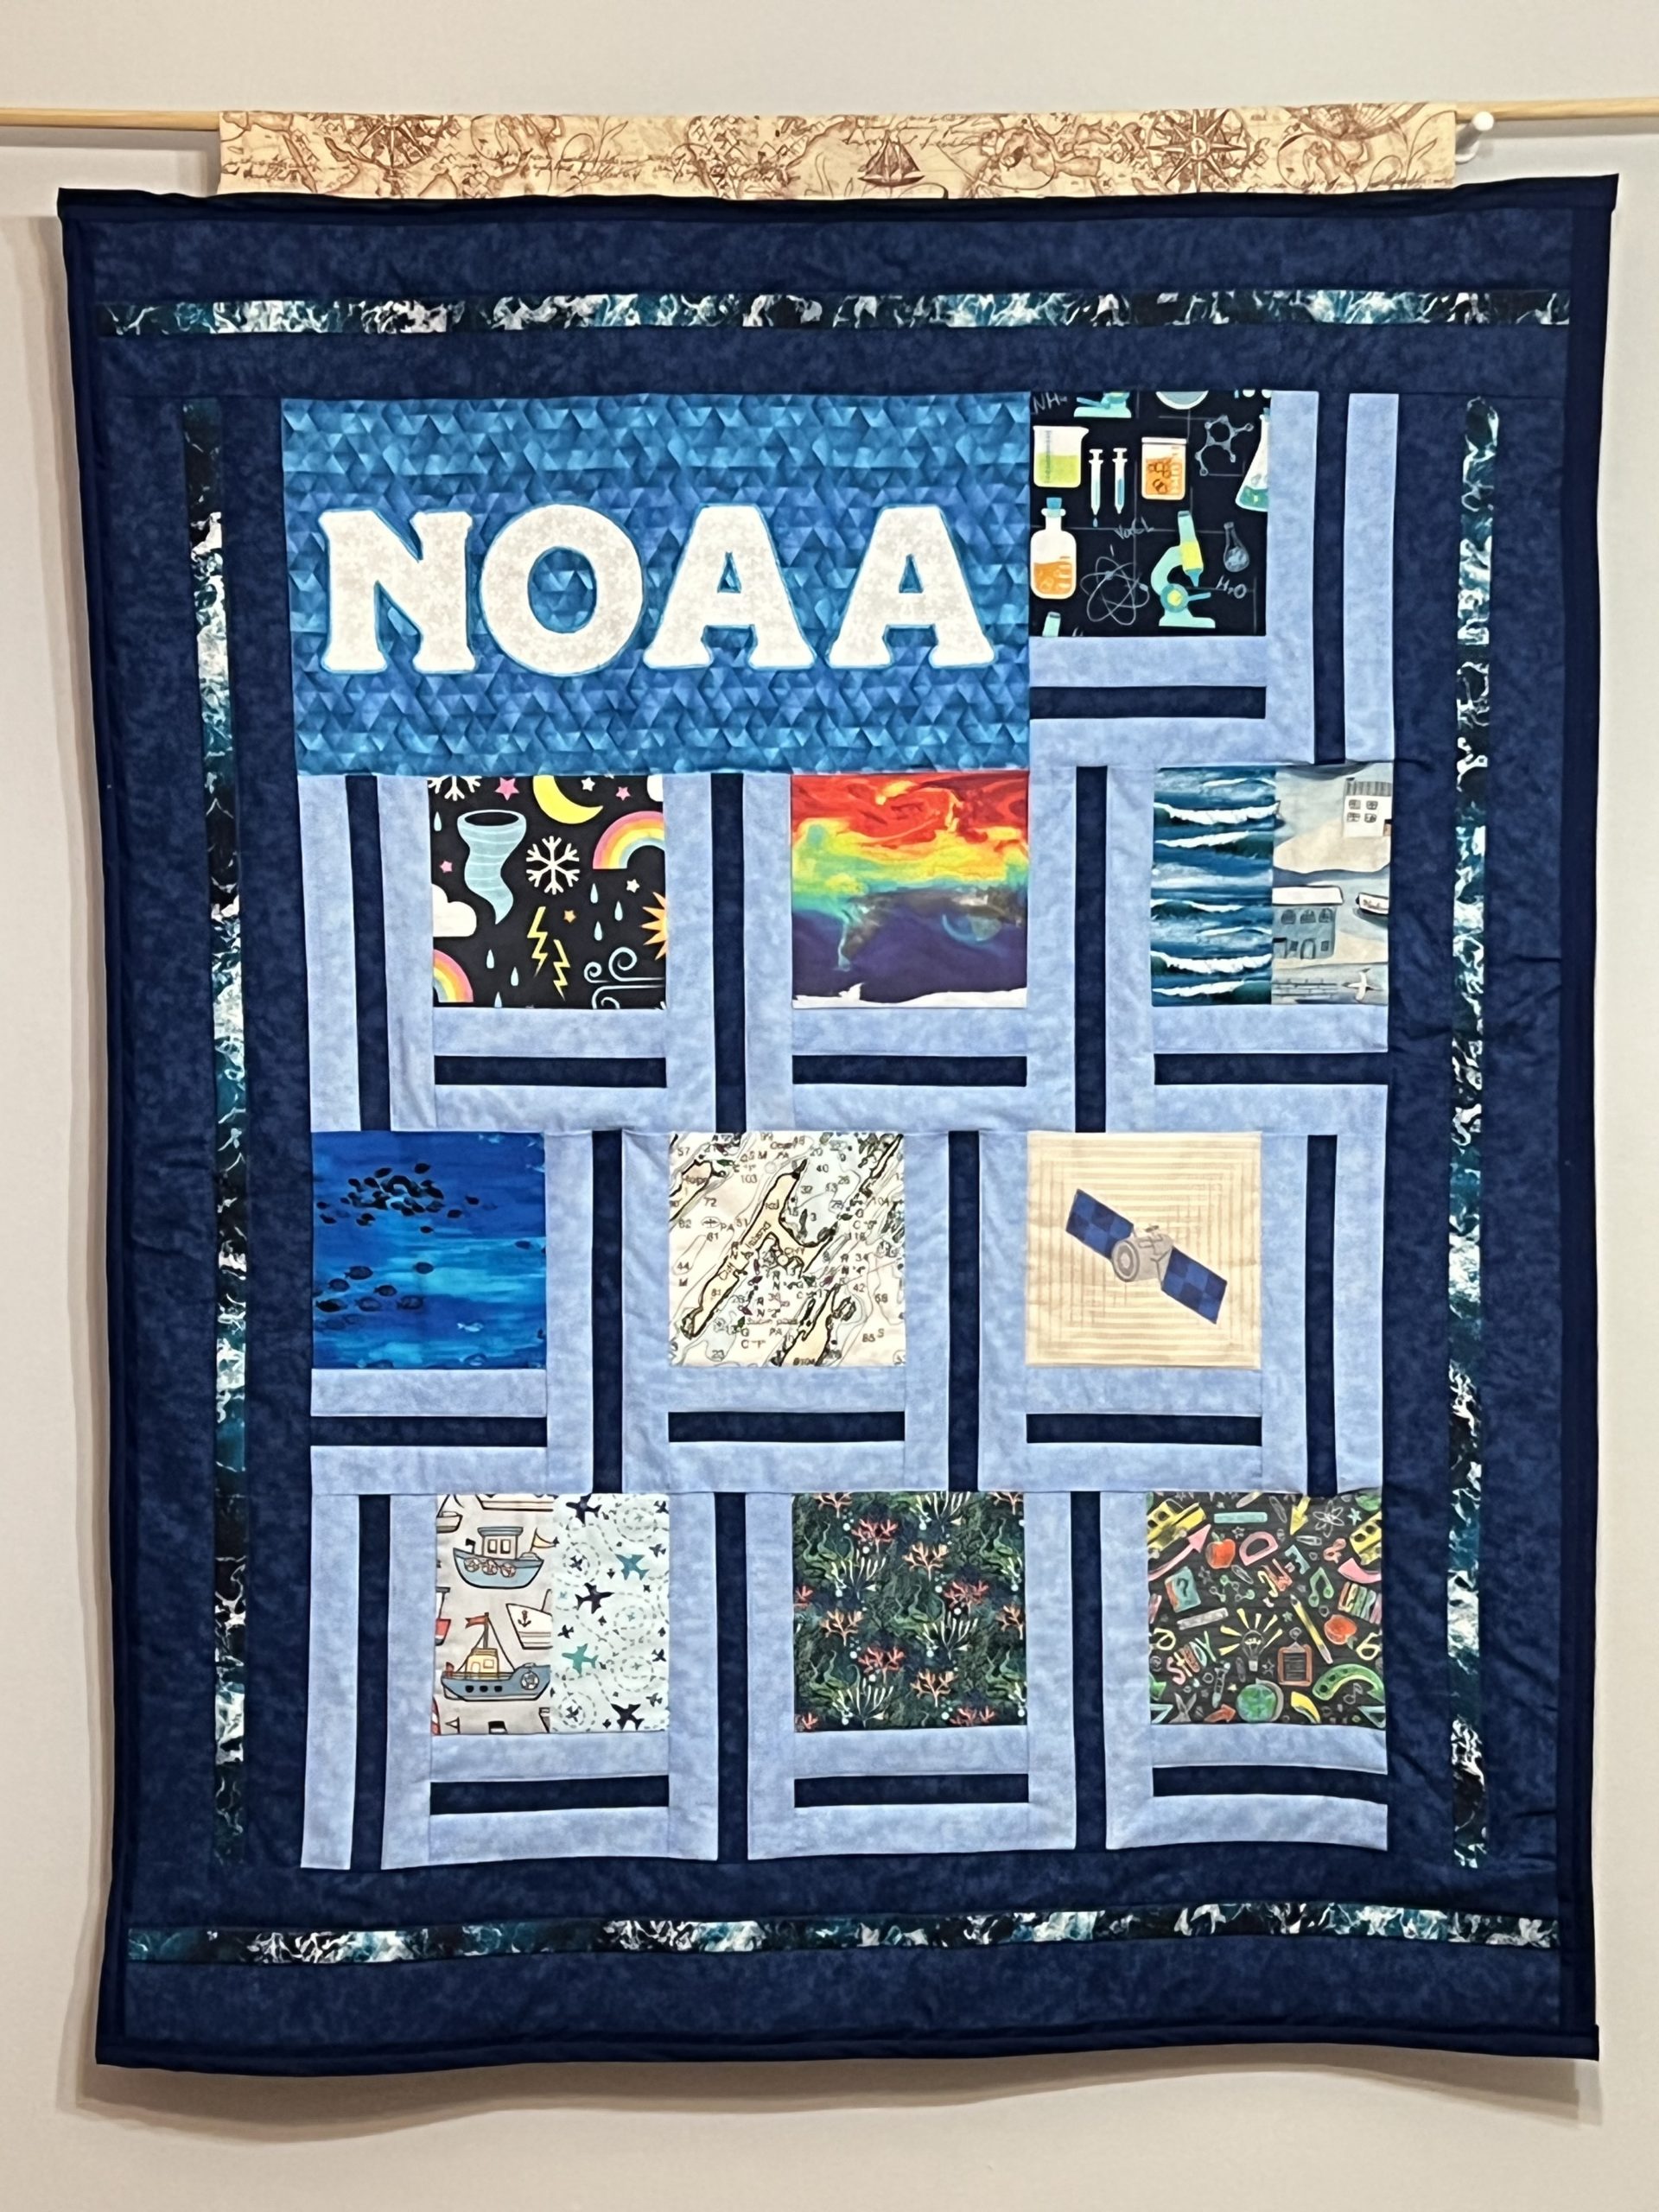 NOAA quilt featuring patches of individual artwork pieces